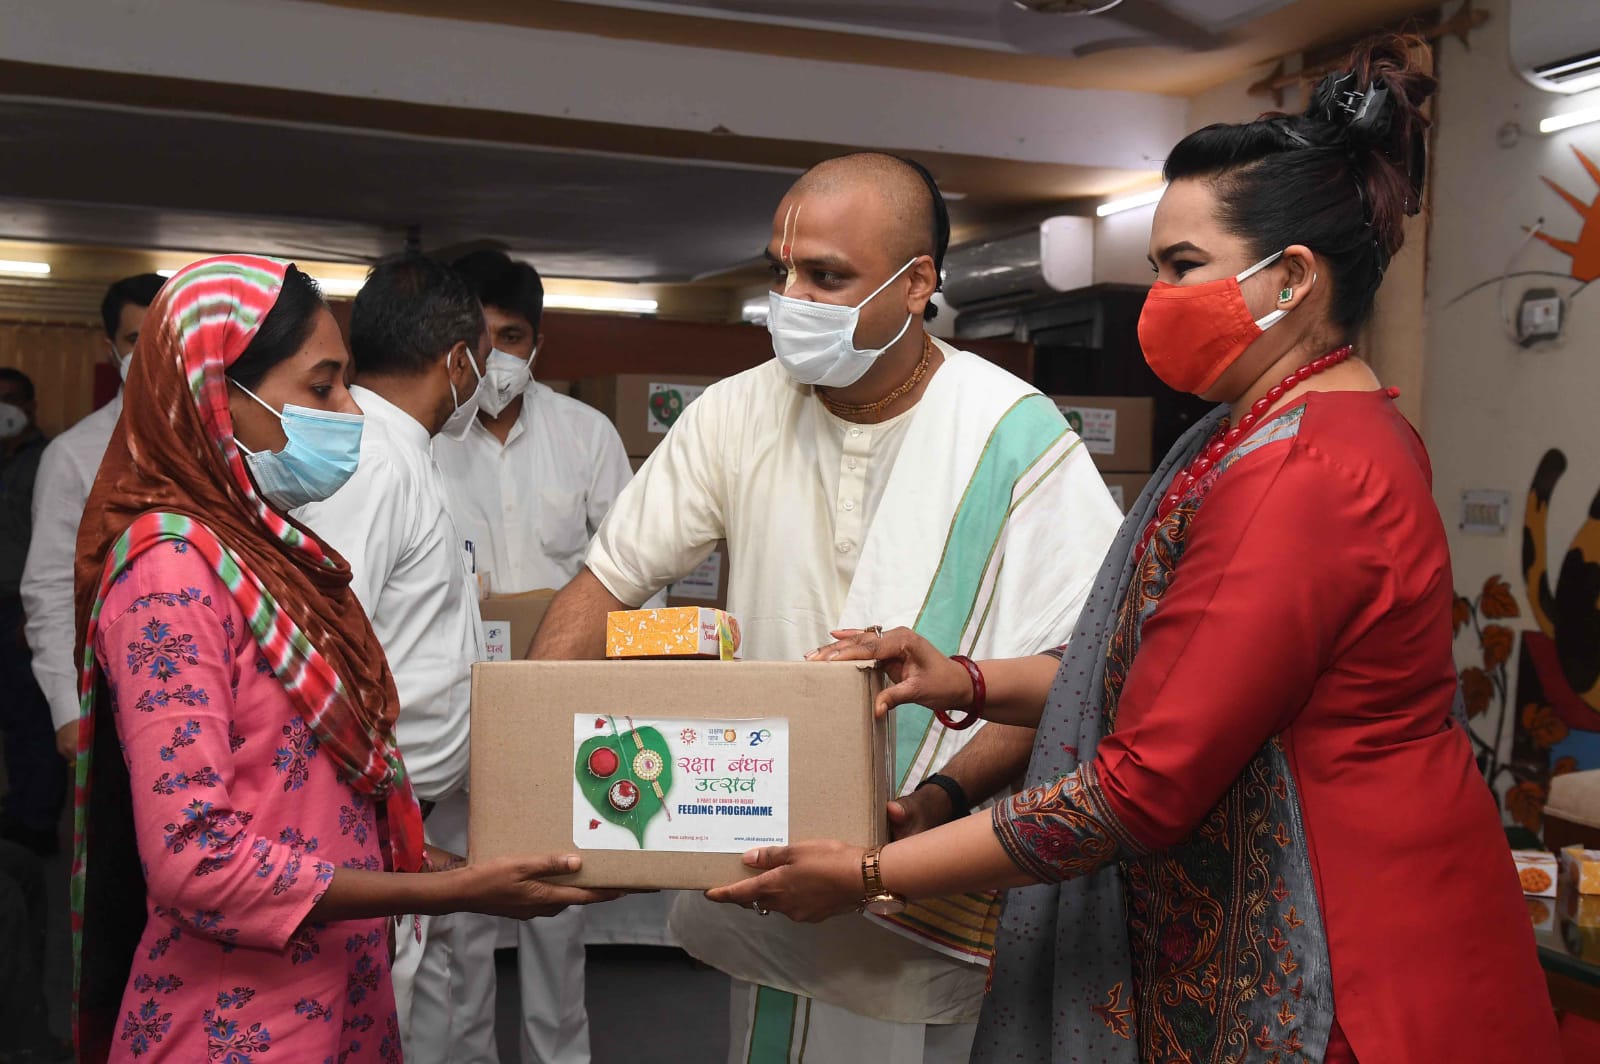 Akshaya Patra and Sahyog Collaborate to Distribute Essential Grocery Kits in Delhi